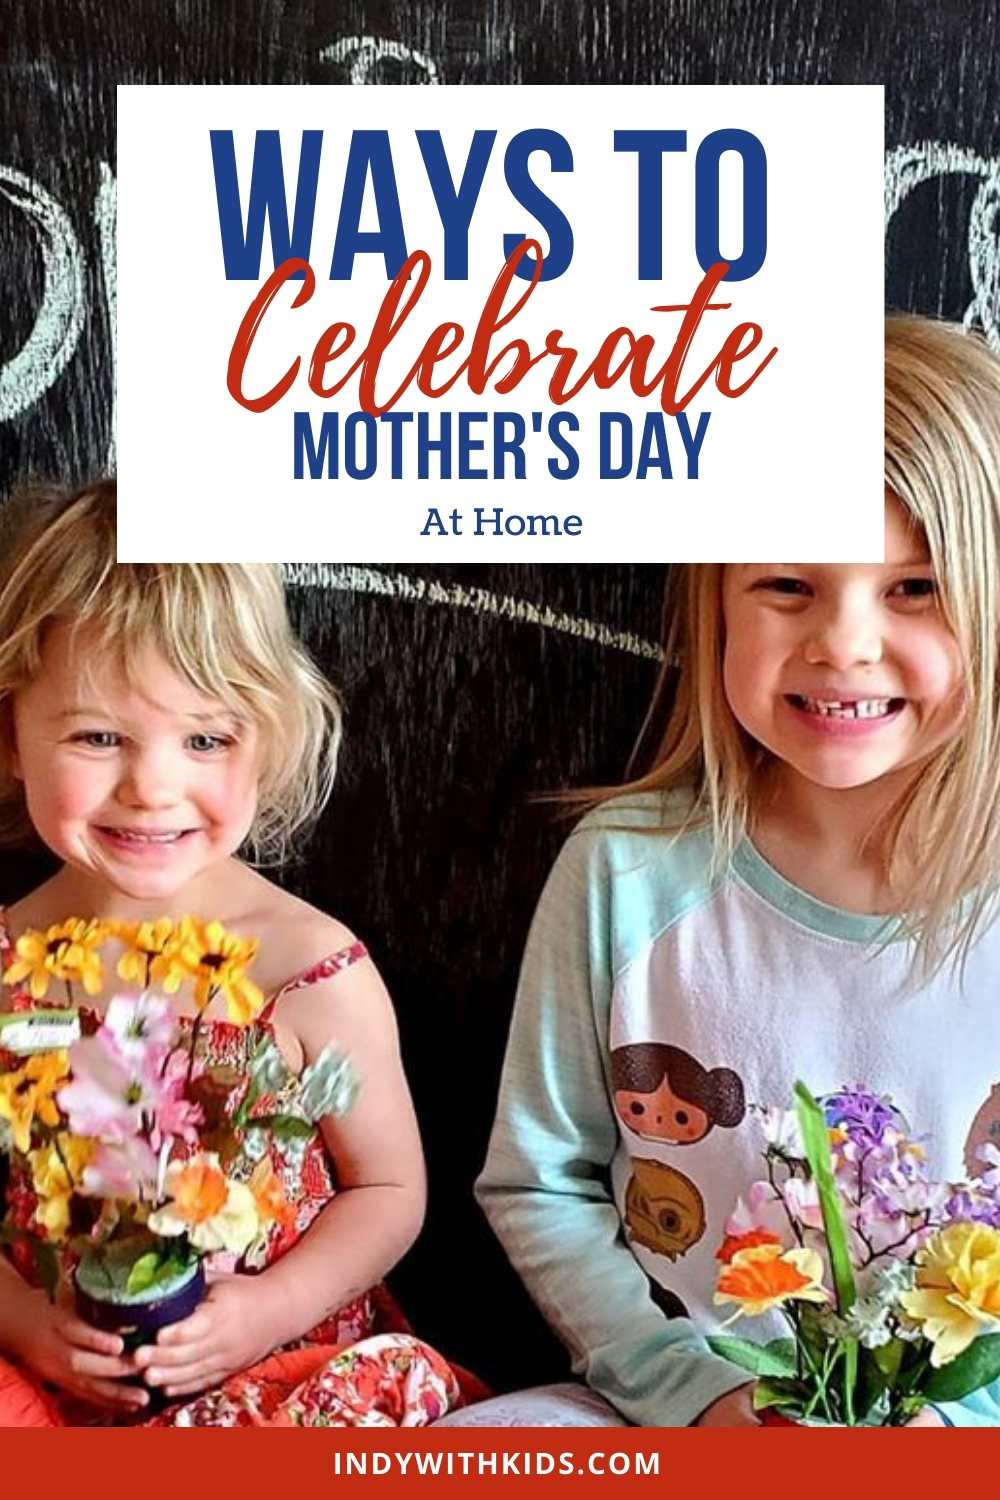 Celebrate Mother's Day with DIY floral bouquets